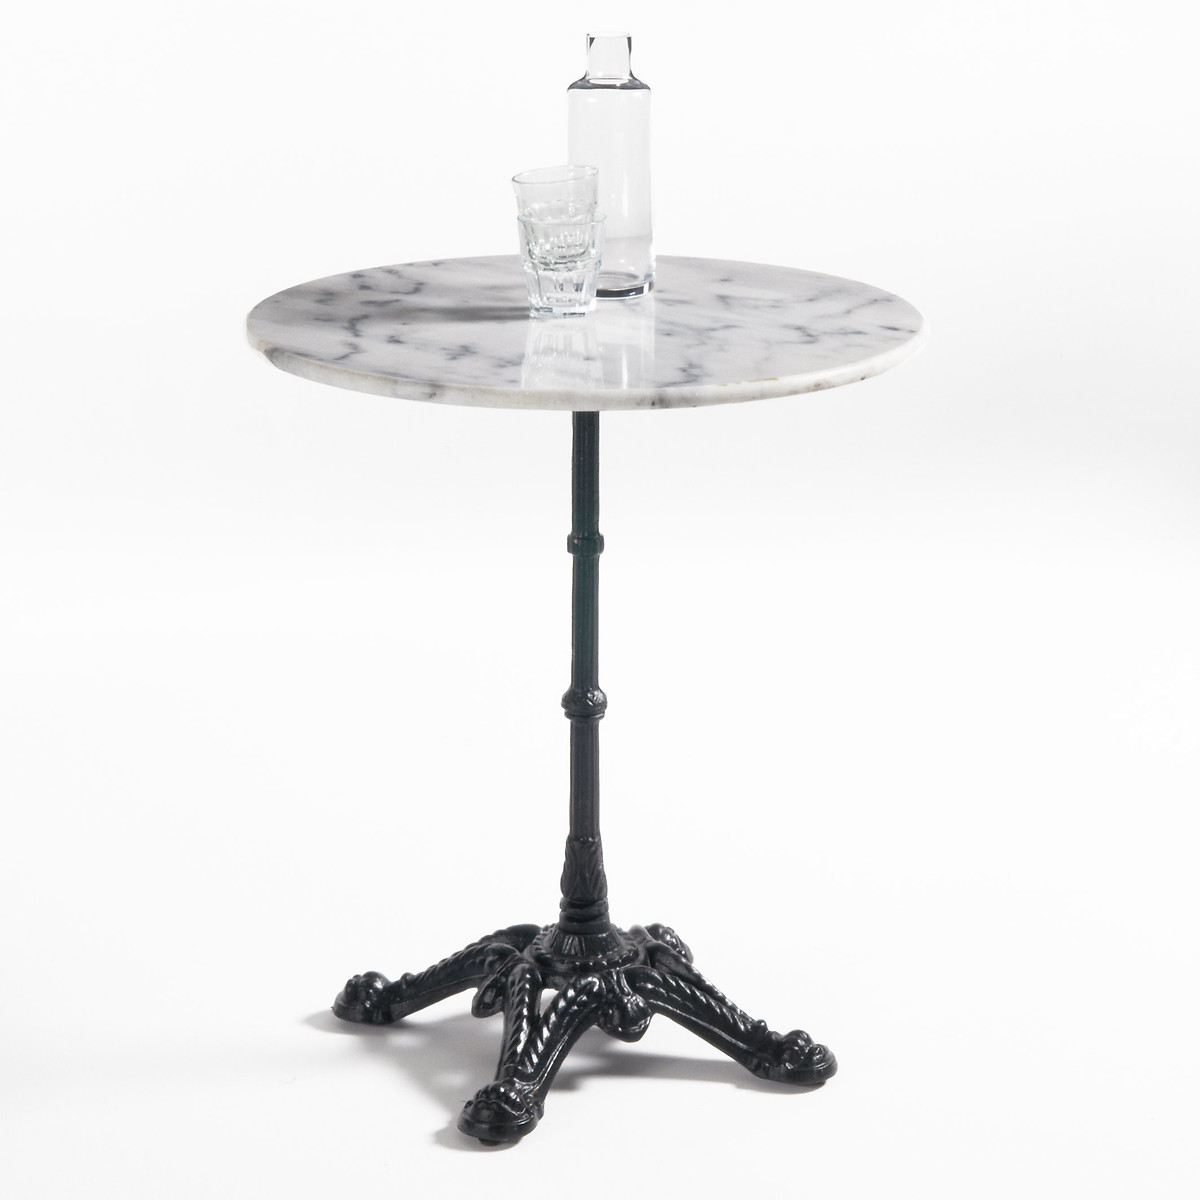 Redville Garden Pedestal Table with Marble Top (Seats 2)